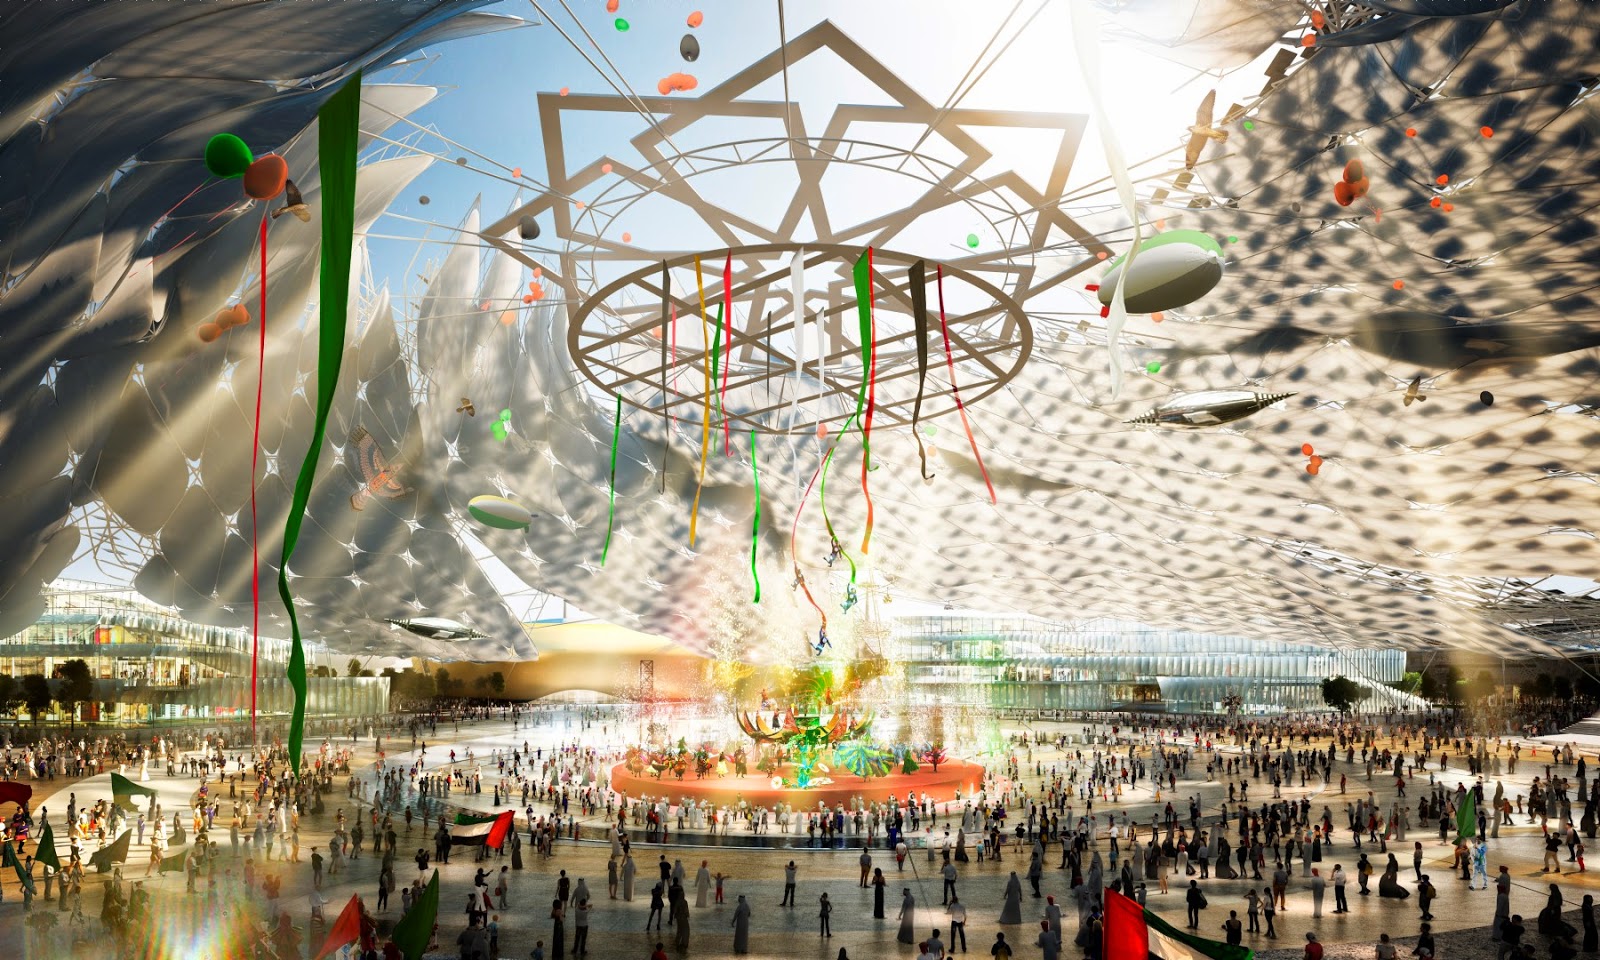 Nearly-9-Million-Visits-Since-Opening-Expo-2020-Dubai-Reaches-Halfway-Point 